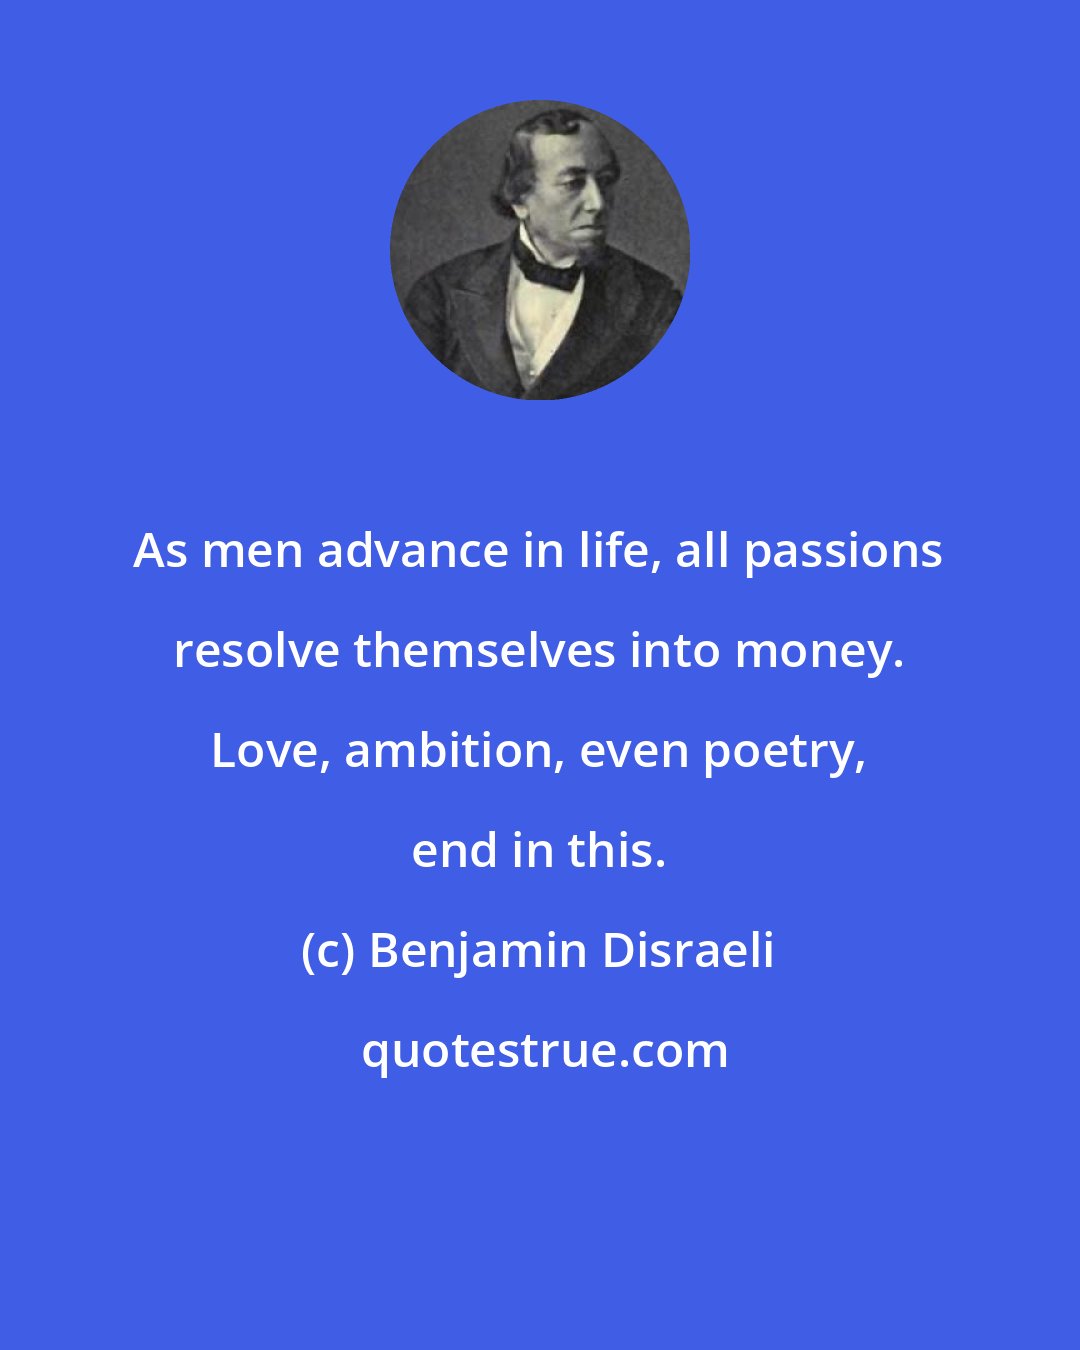 Benjamin Disraeli: As men advance in life, all passions resolve themselves into money. Love, ambition, even poetry, end in this.